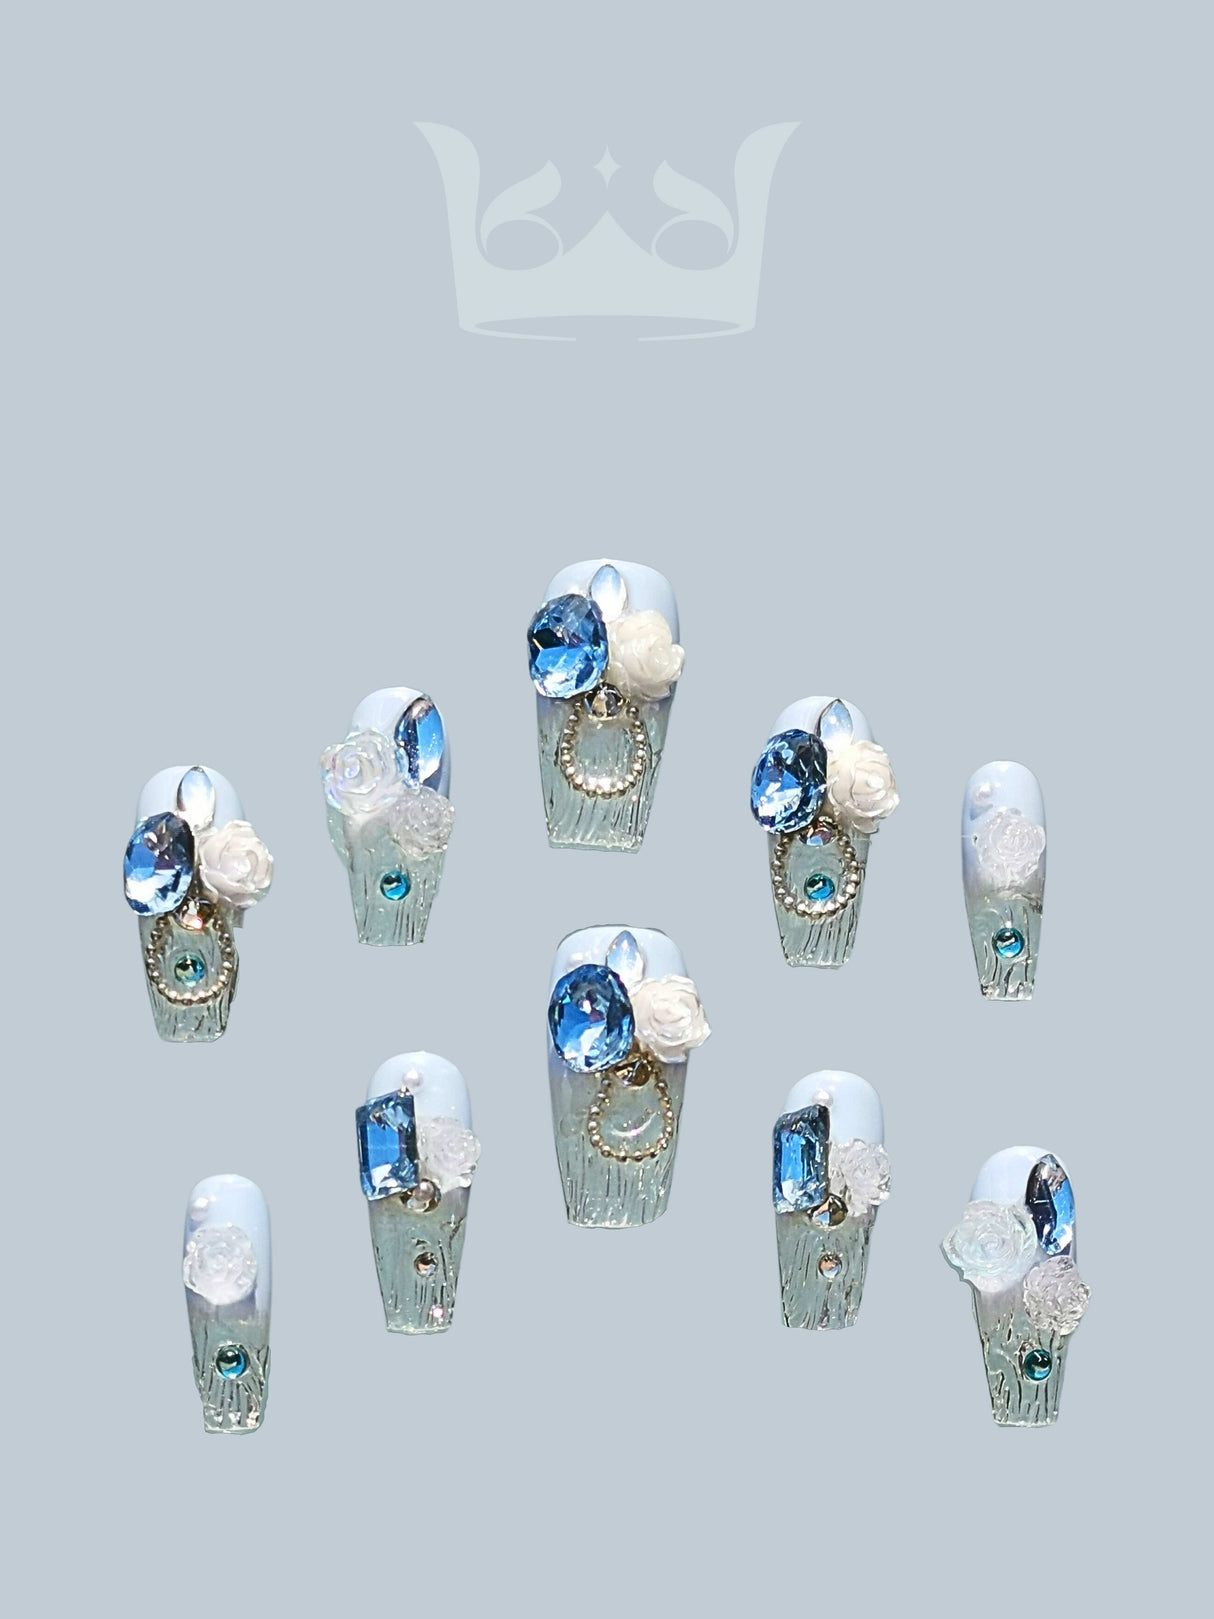 These cute nails with blue diamonds, clear crystals, and white floral accents are designed for a cool and elegant aesthetic with a touch of royalty.